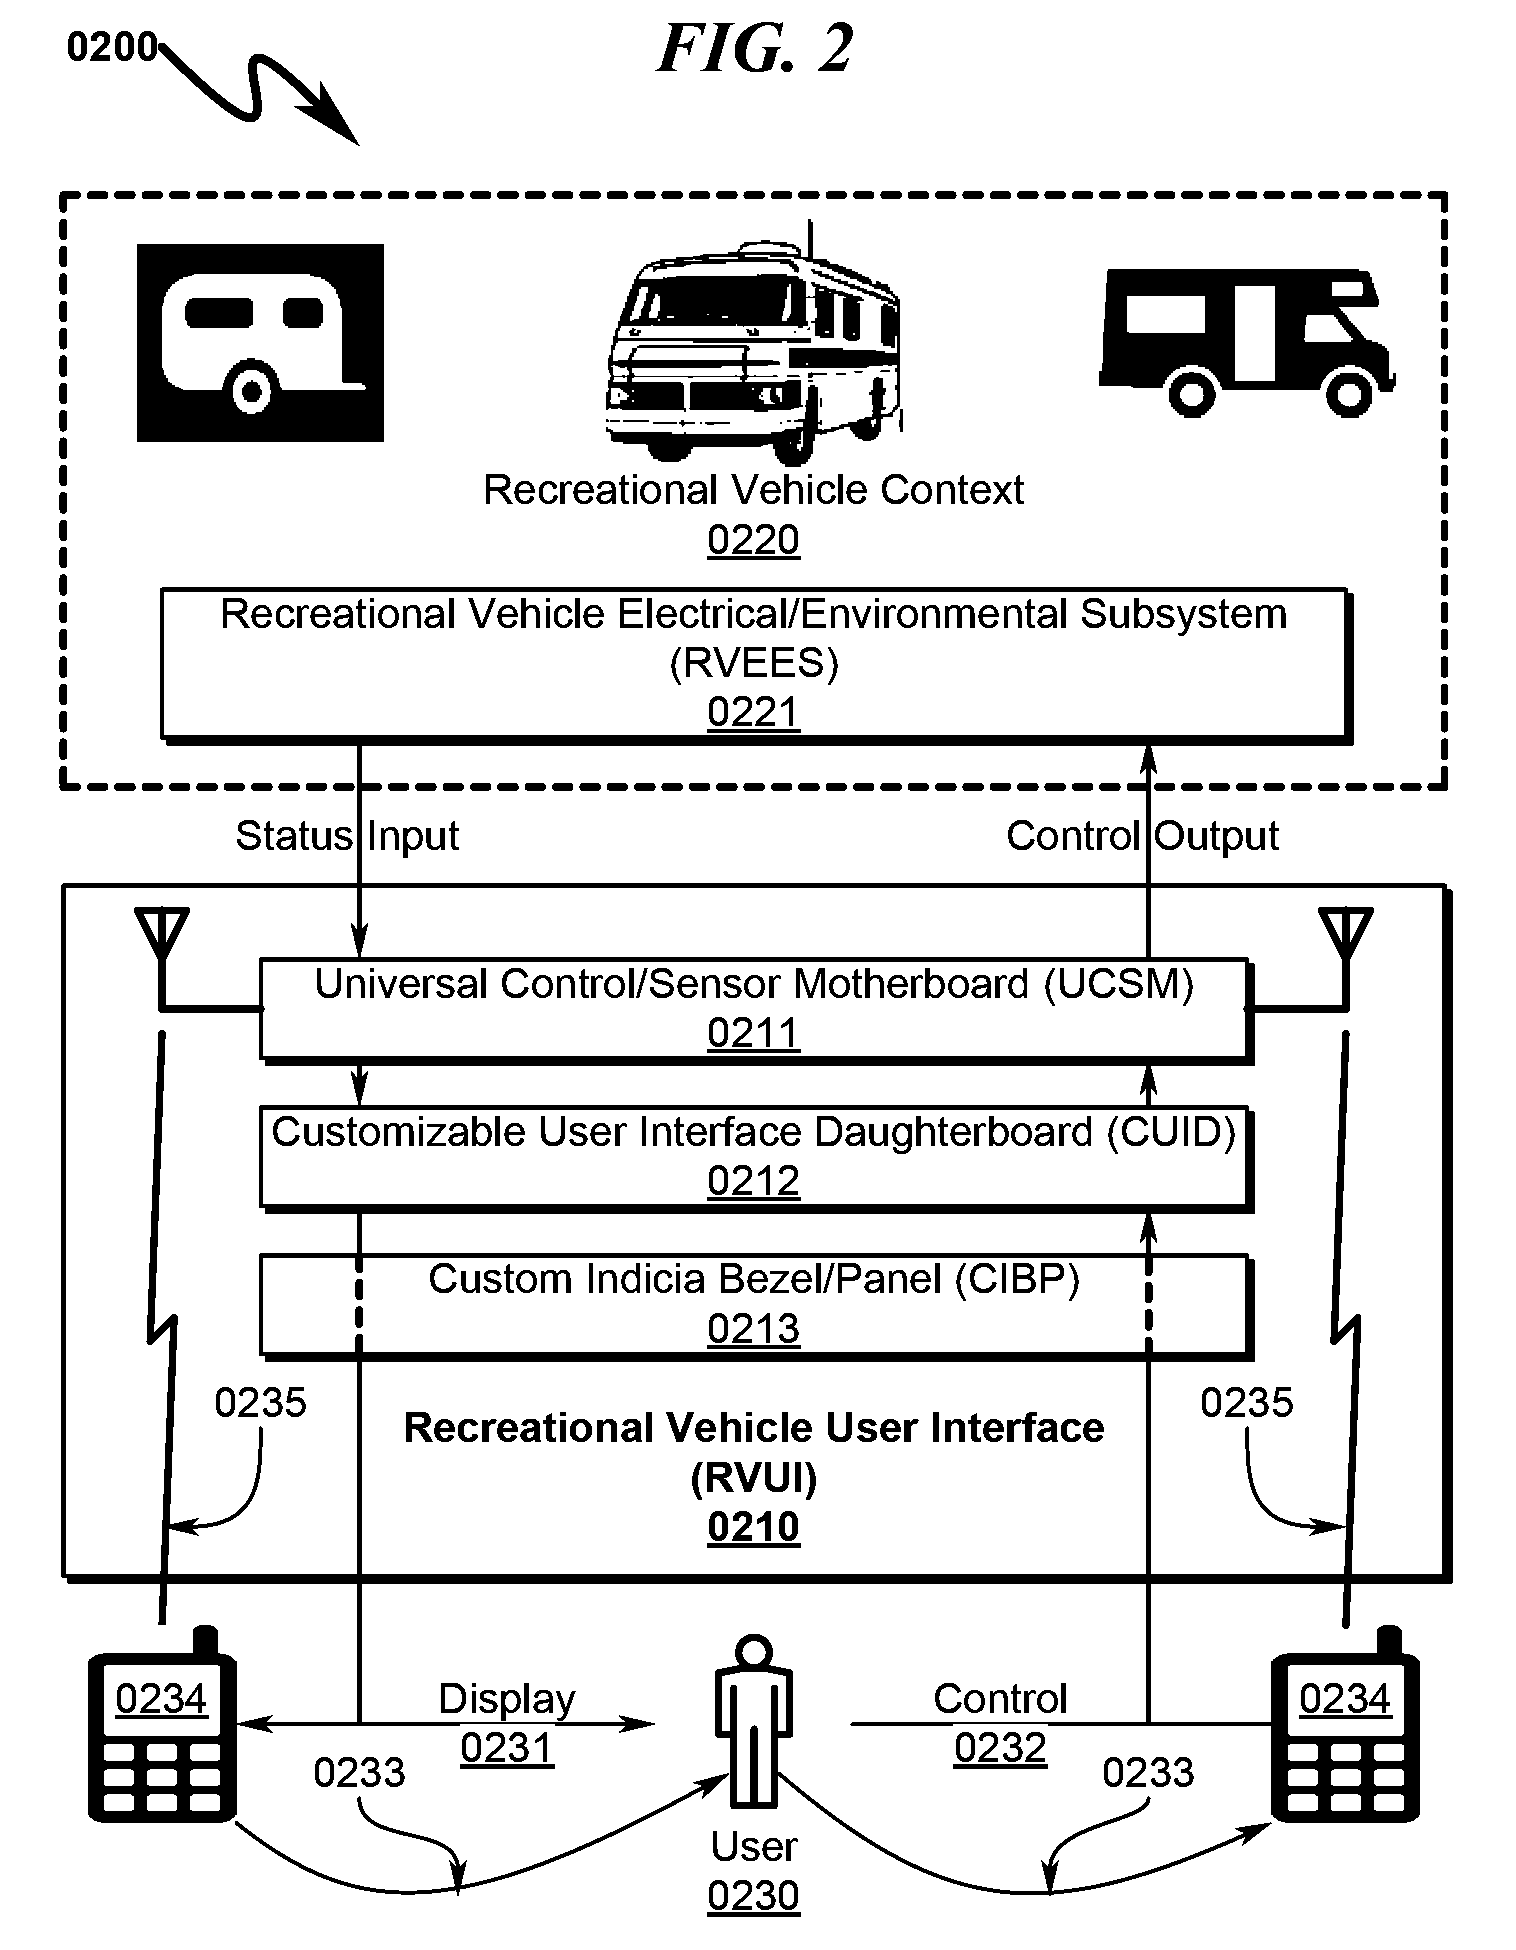 Recreational vehicle user interface system and method